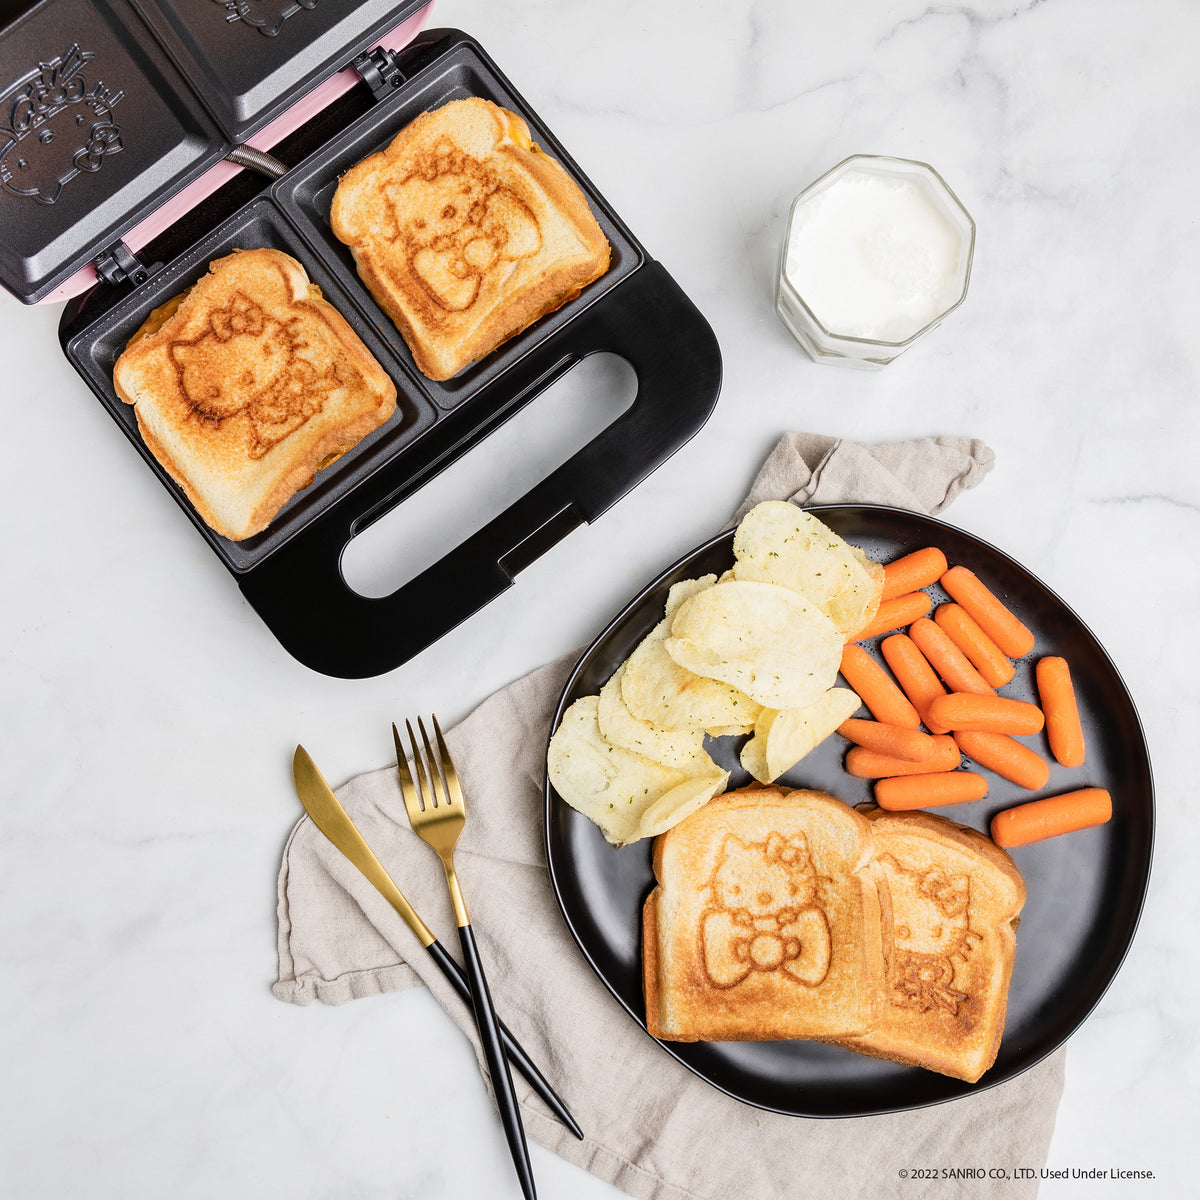 Jurassic Park Grilled Cheese Maker - Uncanny Brands